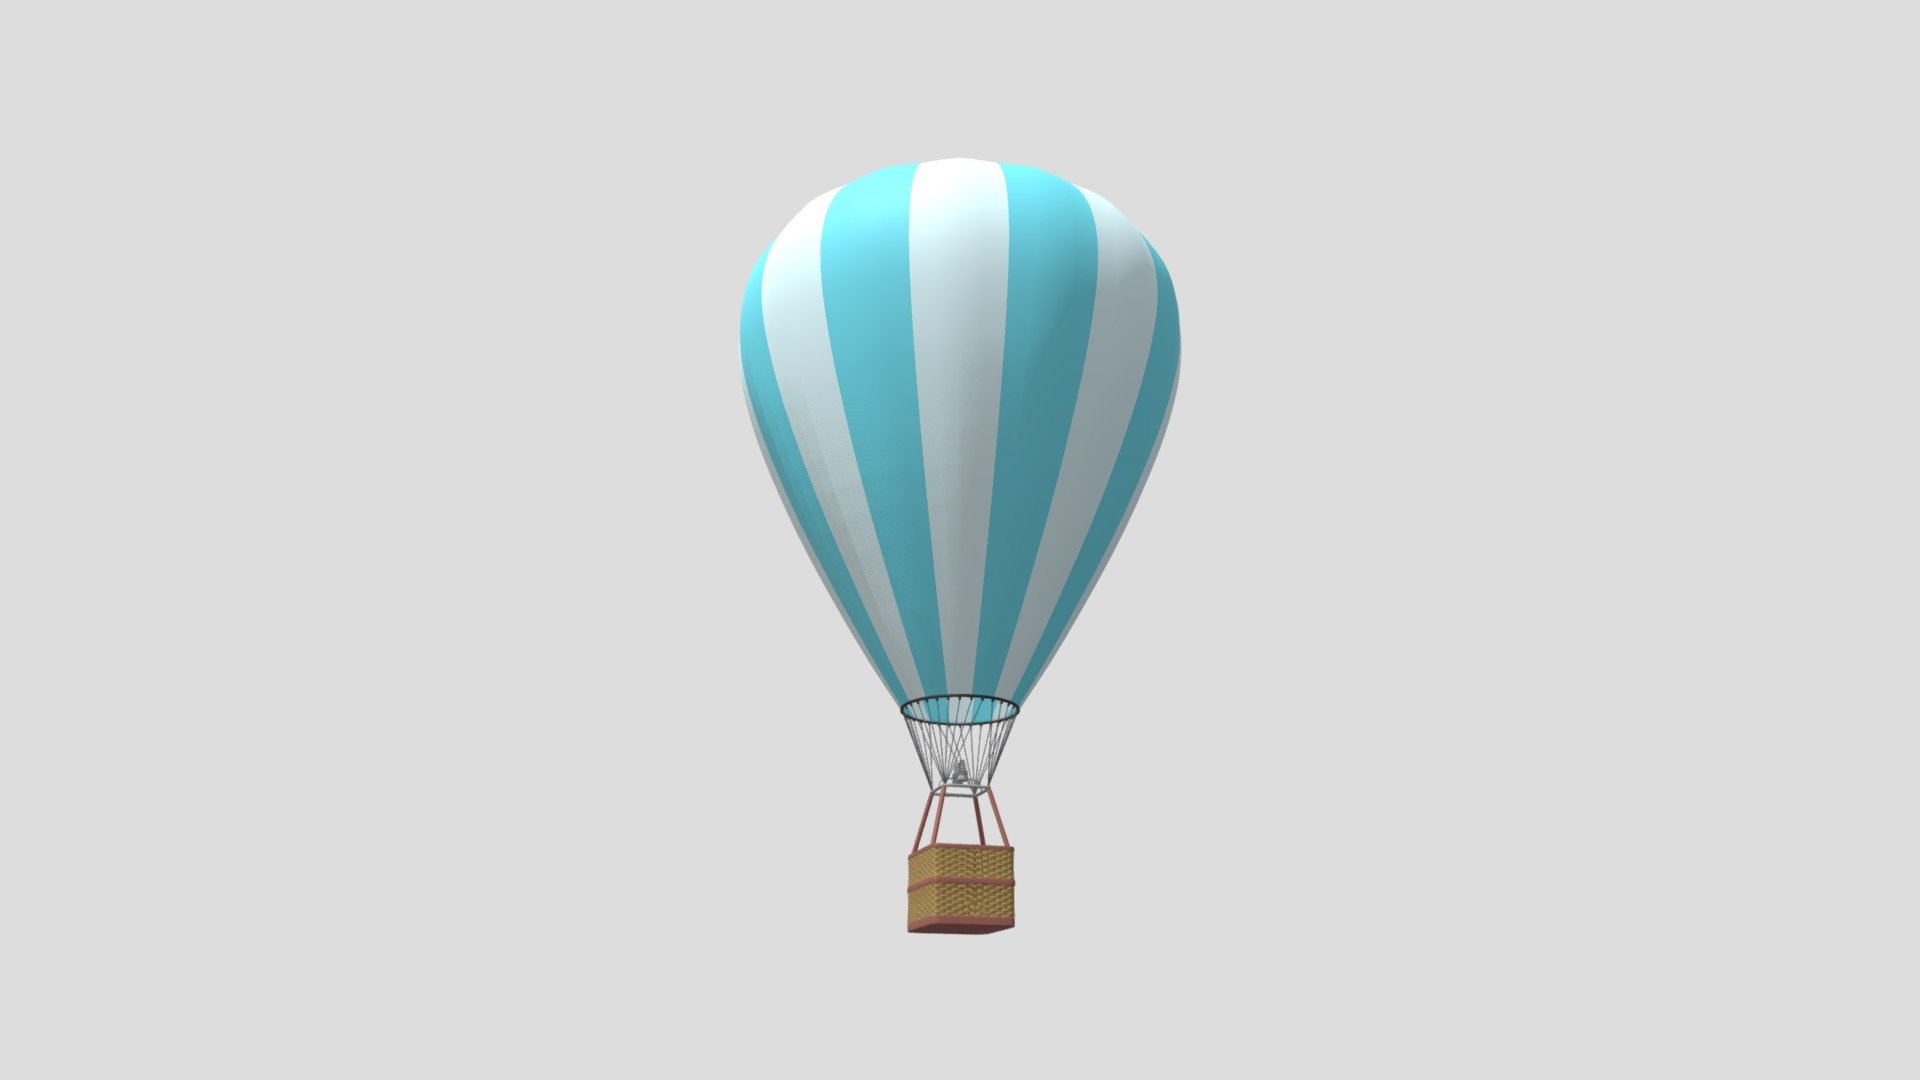 Textures: 2048 x 2048, Six colors on texture: grey, white, orange, blue, red, brown colors.

Has Normal Map: 2048 x 2048.

Materials: 3 - Hot Air Balloon, metal, basket.

Smooth shaded.

Mirrored.

Subdivision Level: 1

Origin located on basket-center.

Polygons: 65918

Vertices: 33284

Formats: Fbx, Obj, Stl, Dae.

I hope you enjoy the model! - Hot Air Balloon - Buy Royalty Free 3D model by Ed+ (@EDplus) 3d model